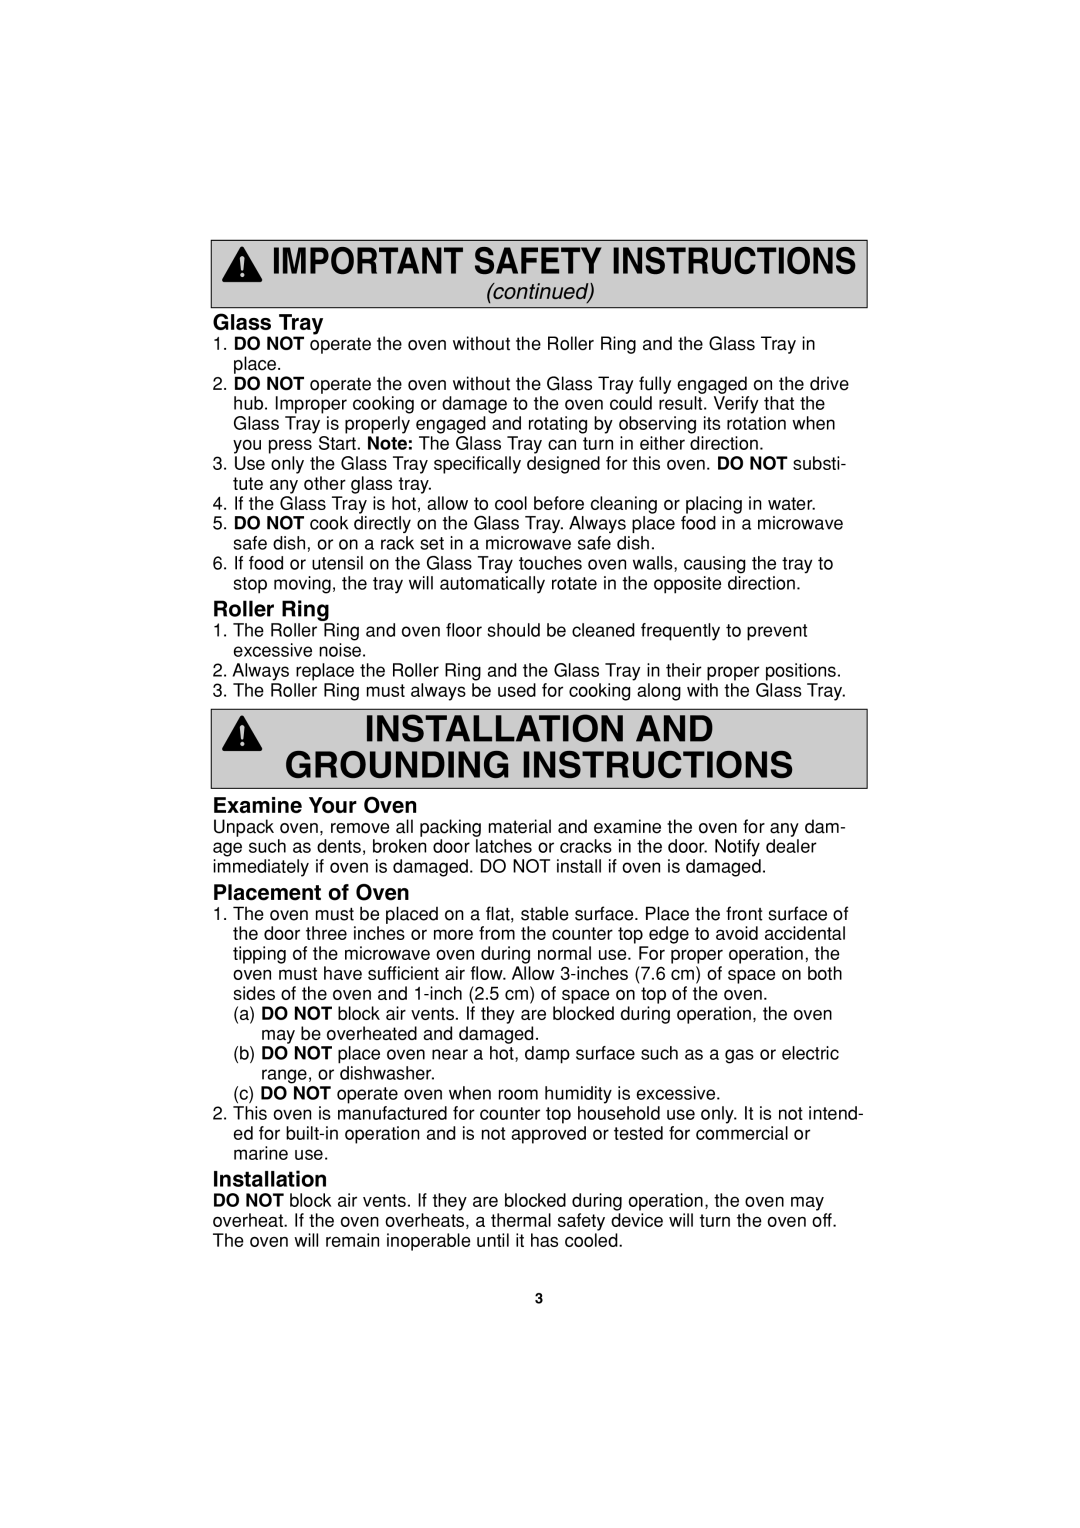 Panasonic NN-S503 Installation And Grounding Instructions, Glass Tray, Roller Ring, Examine Your Oven, Placement of Oven 